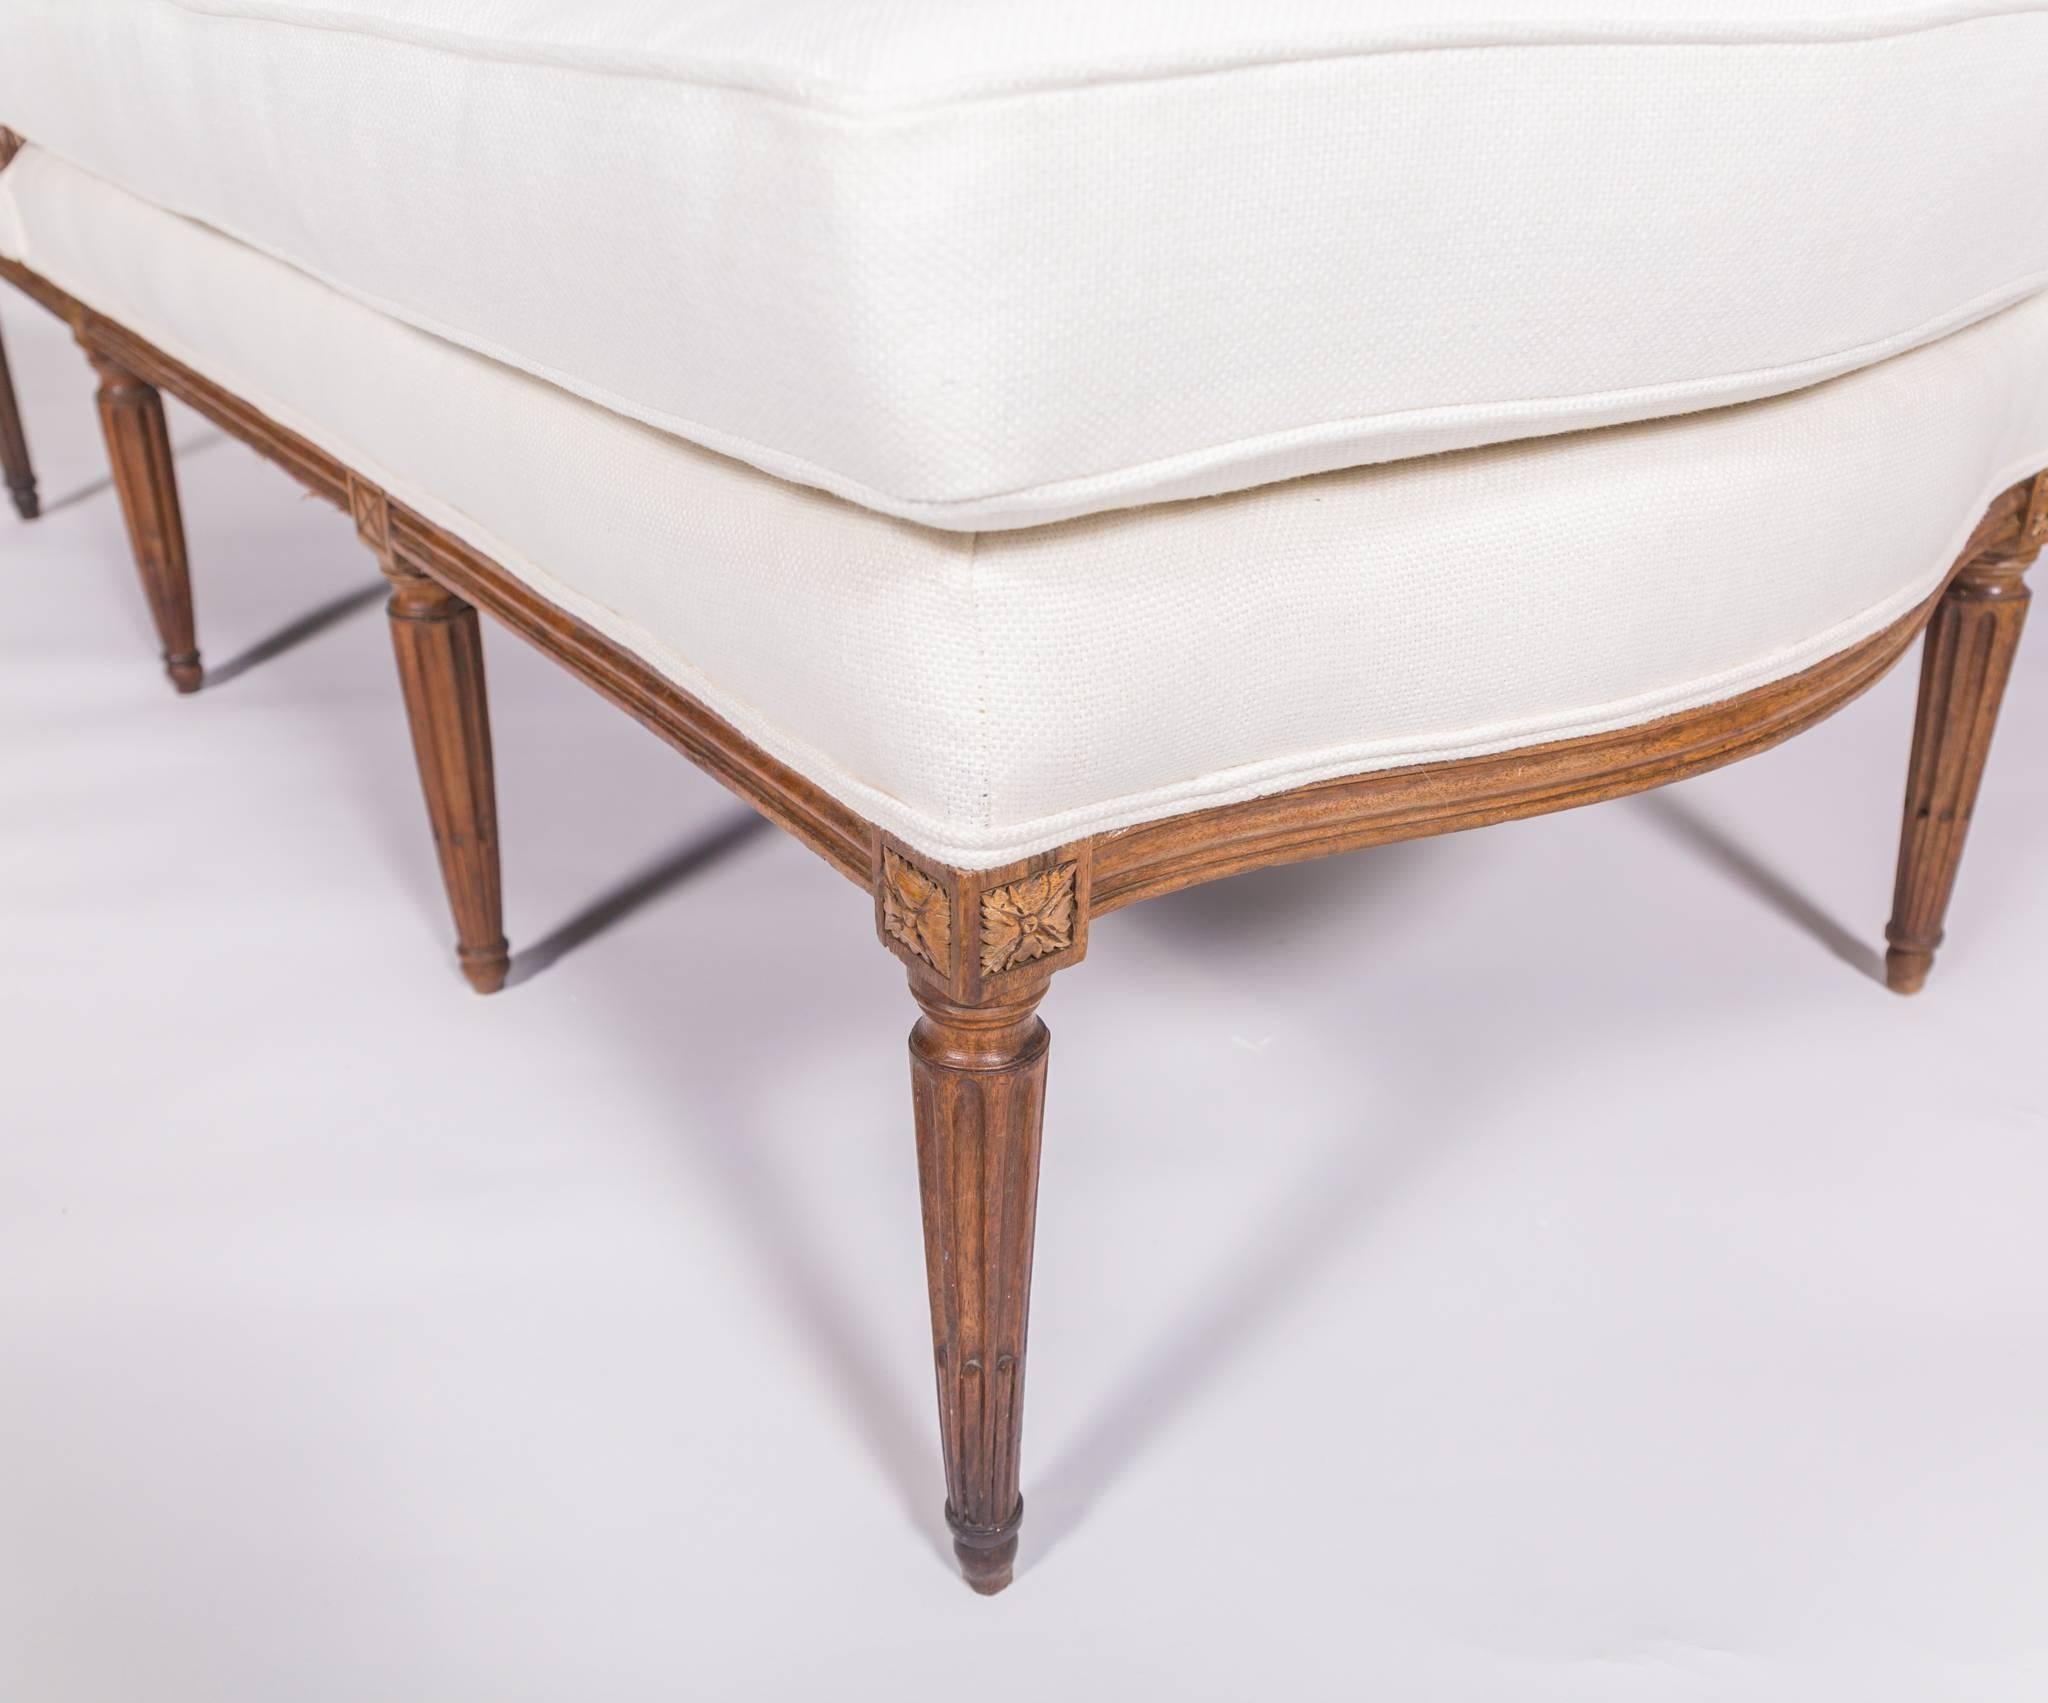 19c French Louis XVI chaise. Lovely wooden chaise in white upholstery. Carved wooden frame and legs in polished walnut wood. Wear consistent with age and use. Wood shows wear and scratches. 

Measures: approximately 78